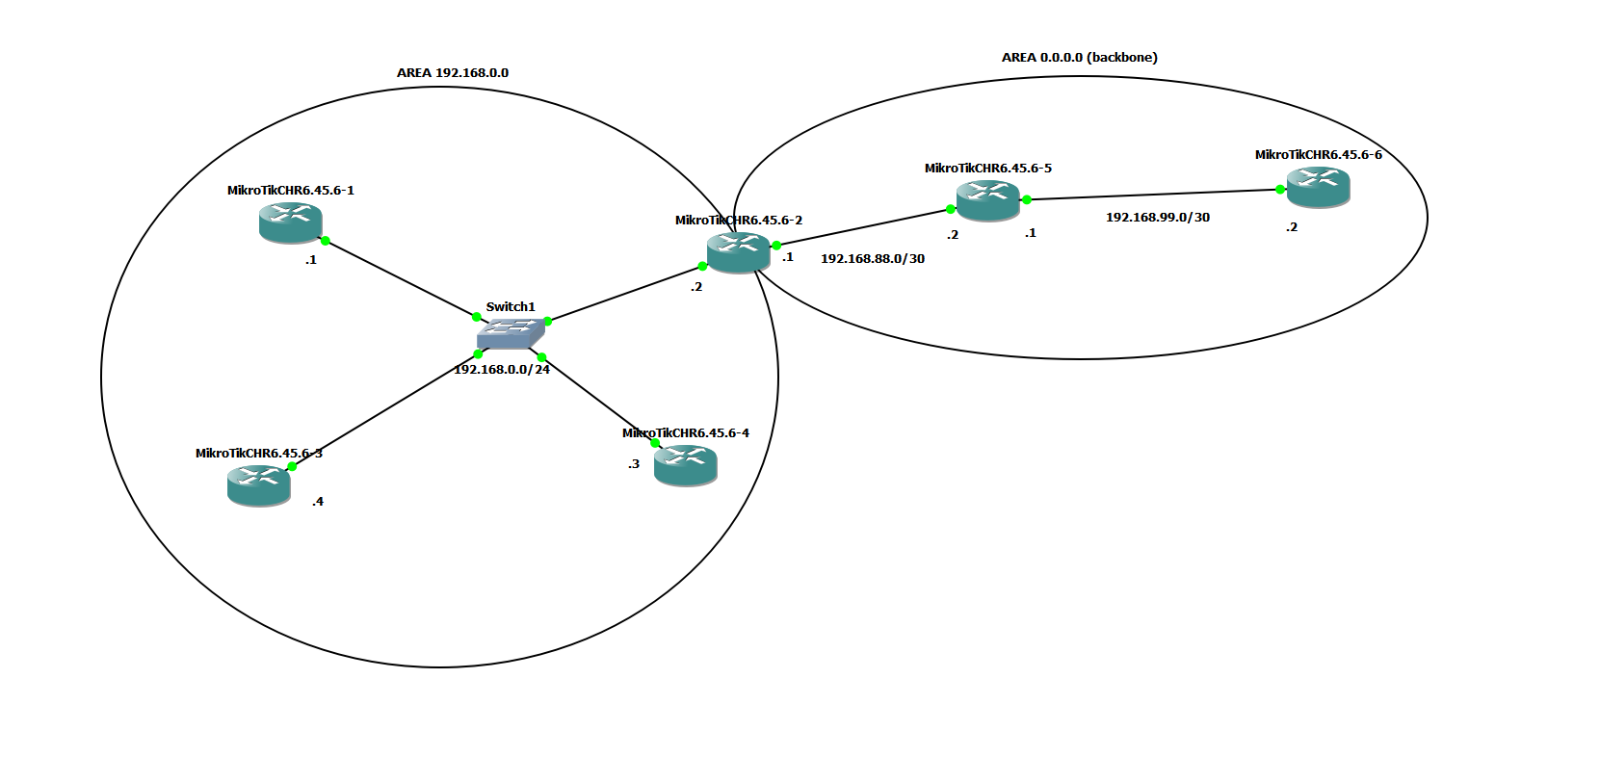 ospf-ptmp-summary.png